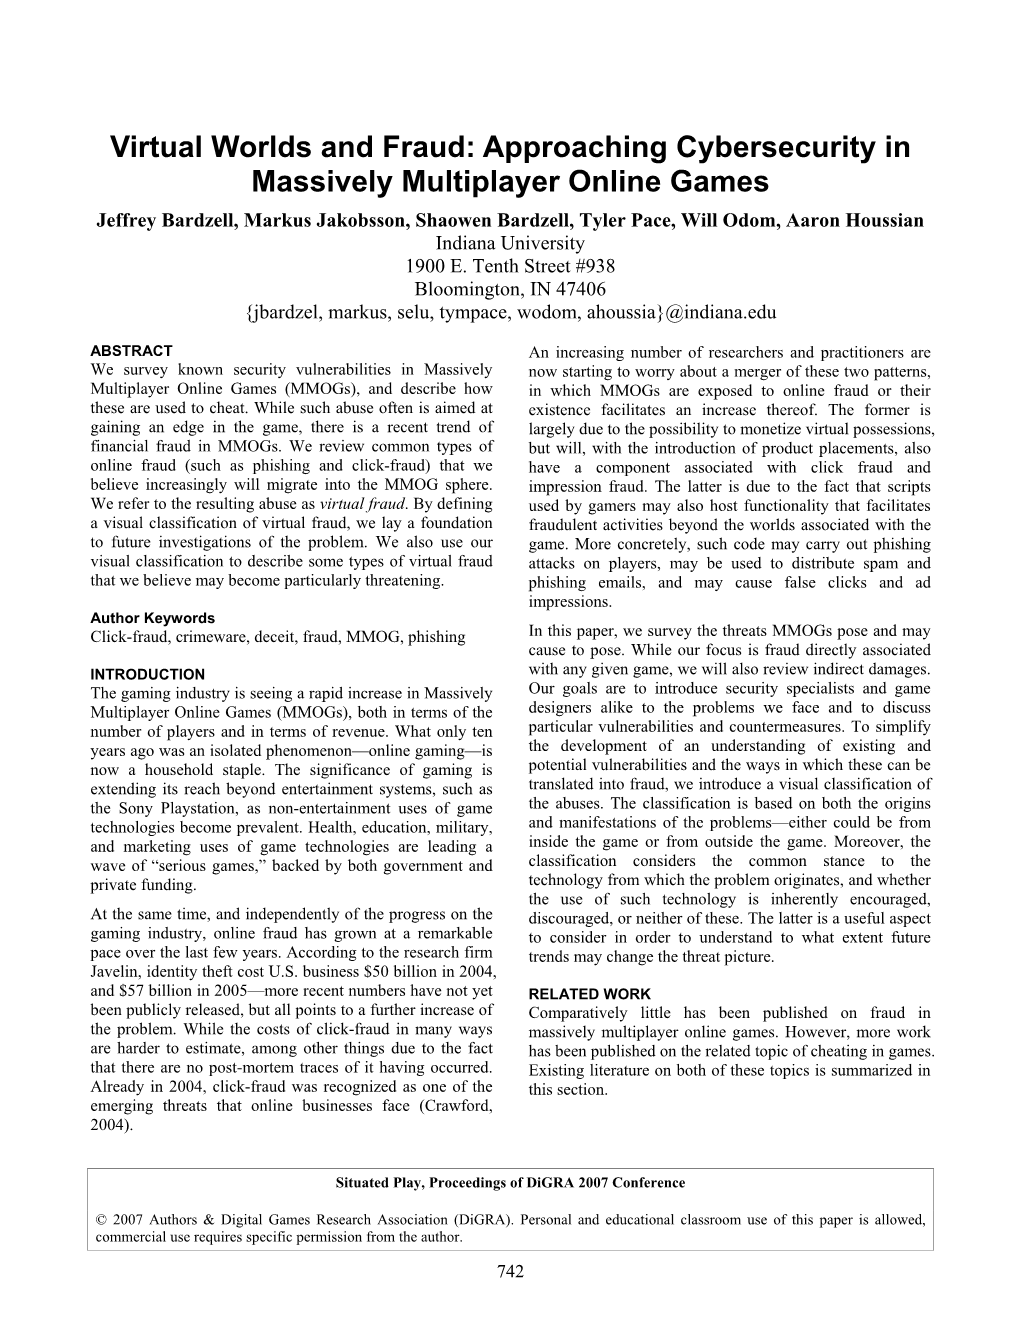 Virtual Worlds and Fraud: Approaching Cybersecurity in Massively Multiplayer Online Games